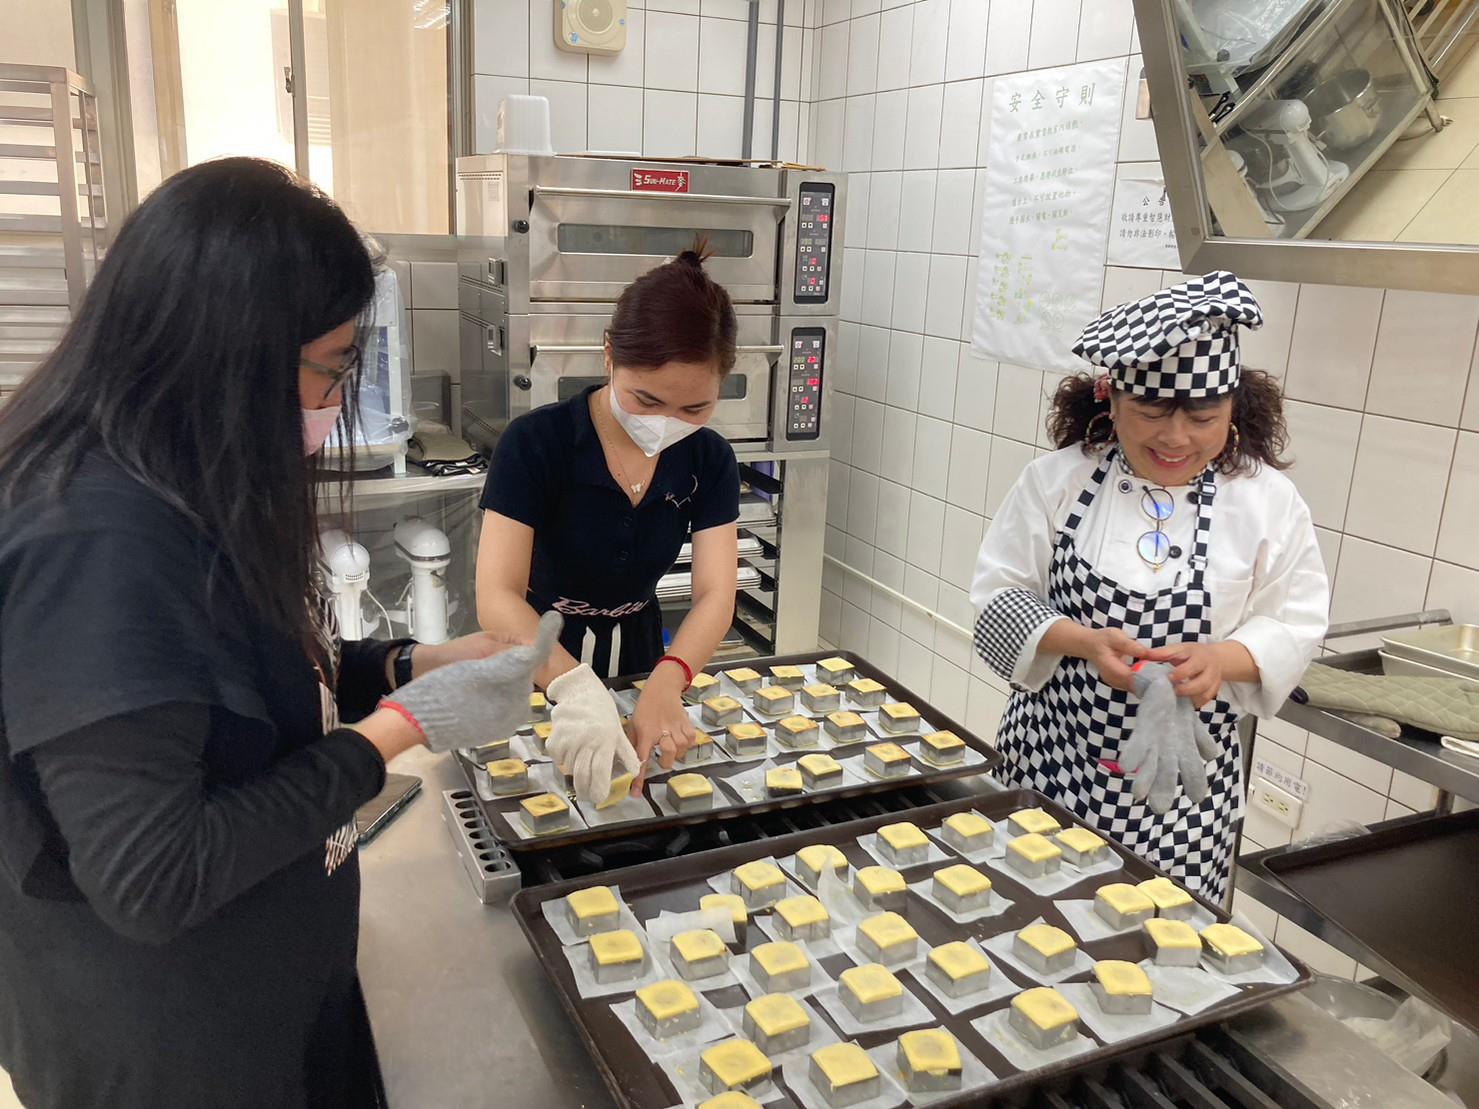 Photos of International Foundation Program Cultural Activities – Making Pineapple Cakes